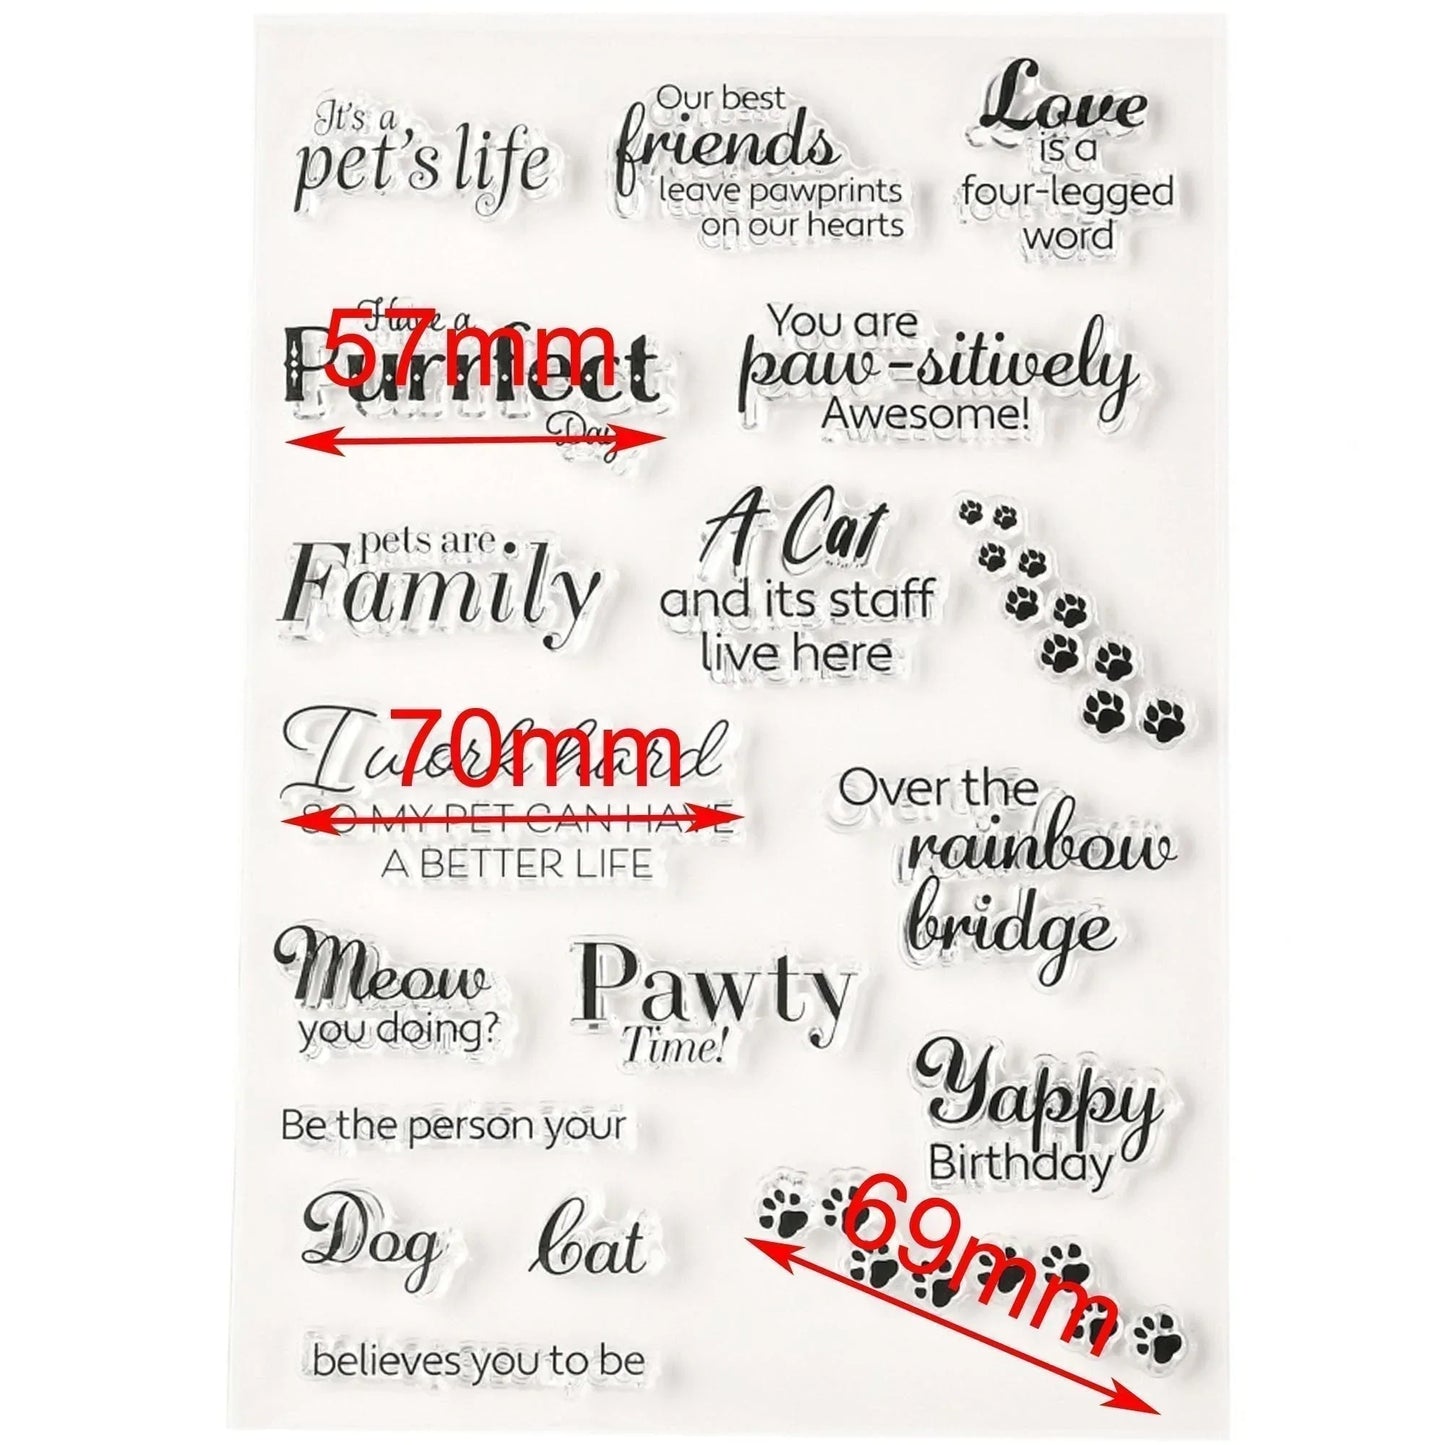 Paw Prints Pet Life Message Clear Stamp Silicone Rubber Scrapbooking Card Making